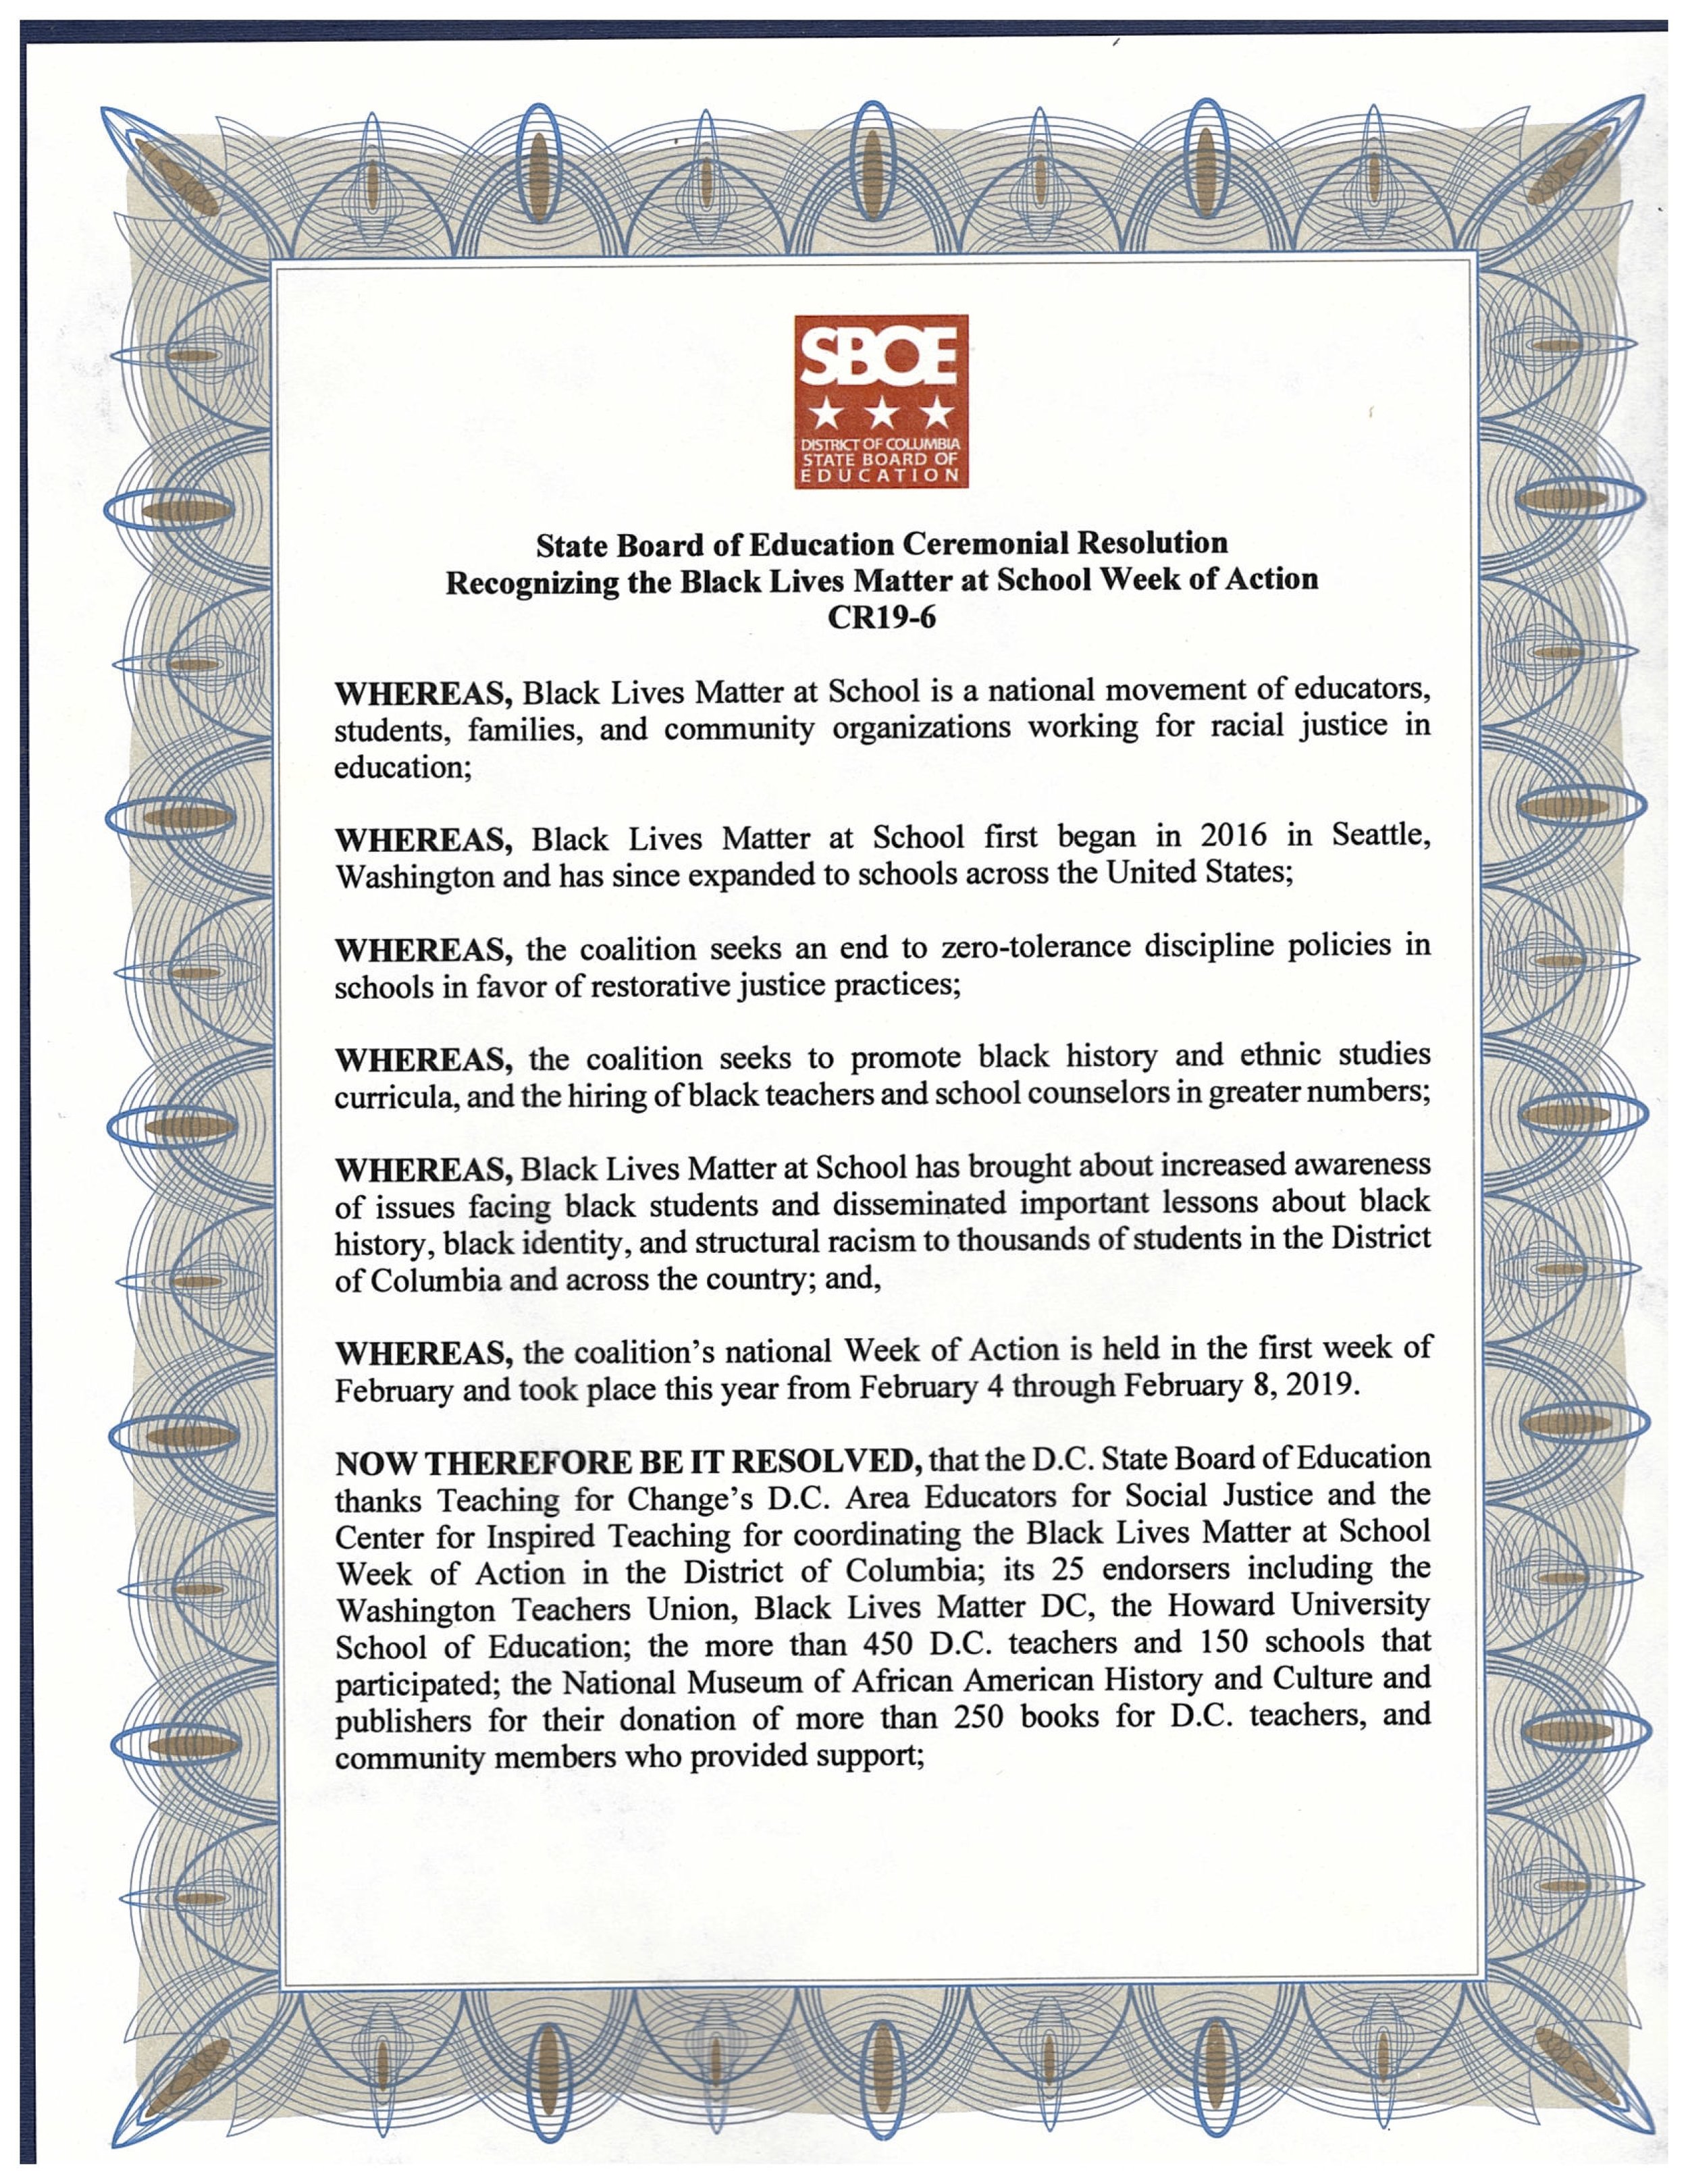 State Board of Education Ceremonial Resolution Recongizing the Black Lives Matter at School Week of Action _ Page 1.jpg